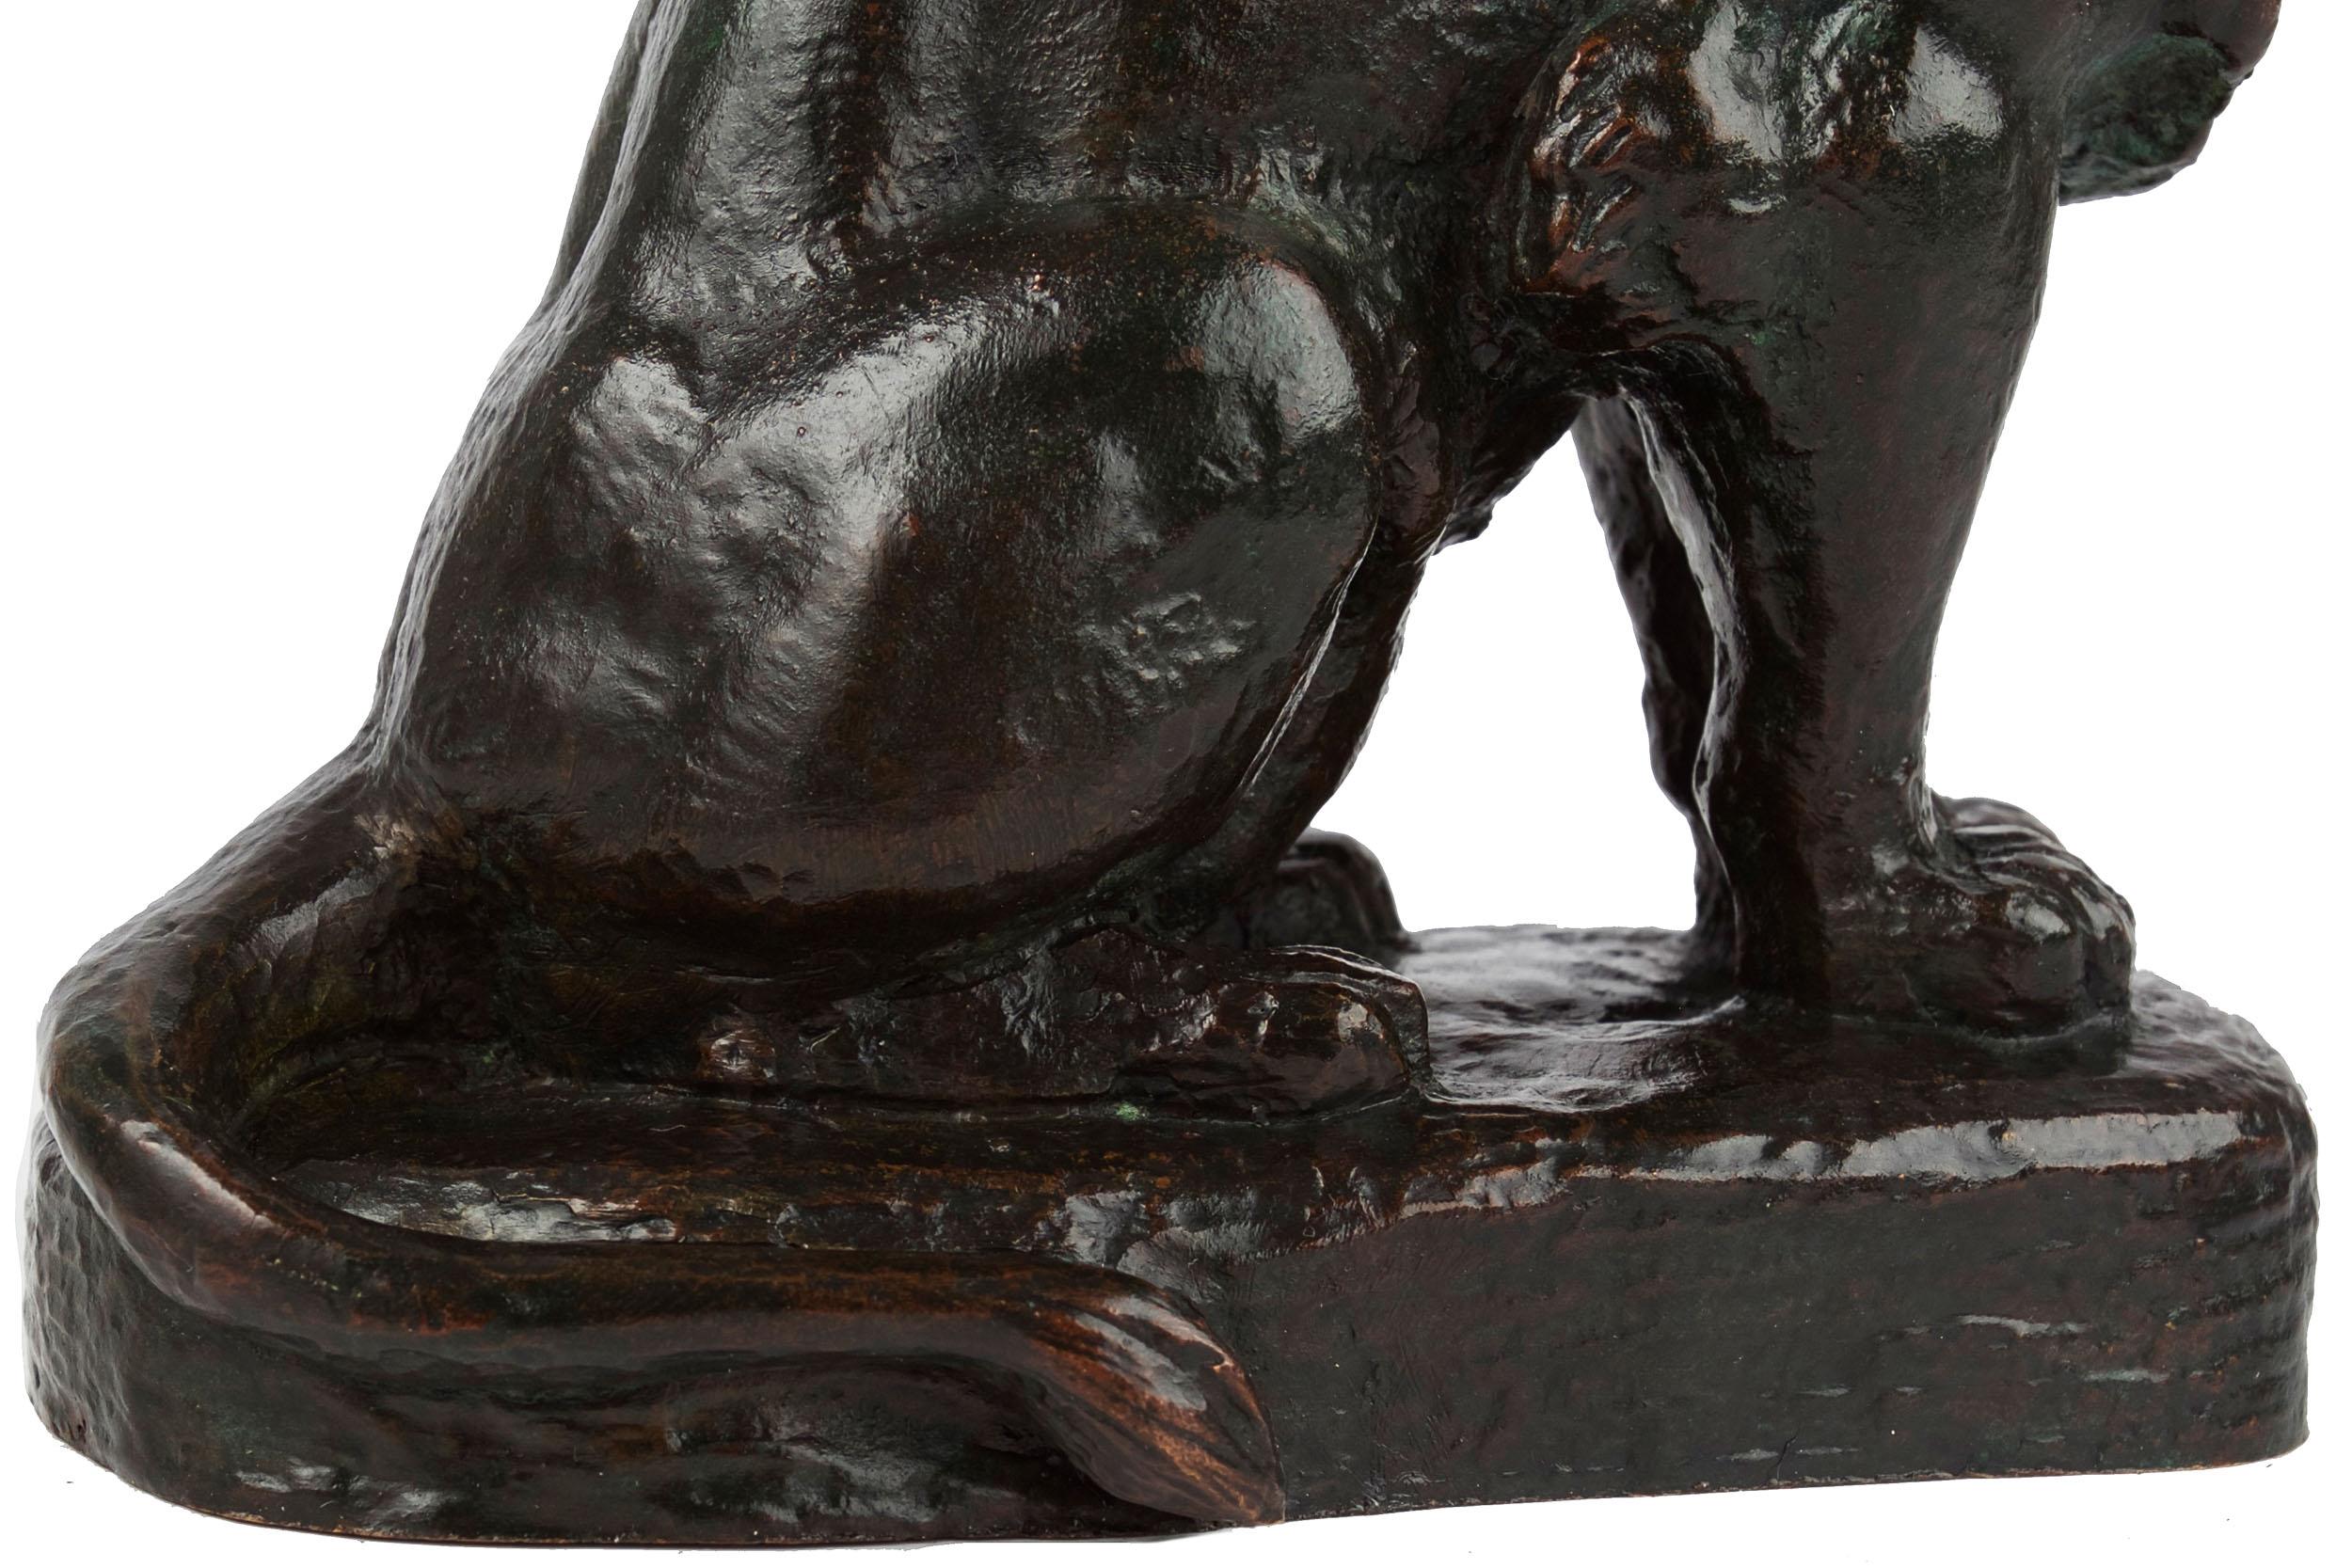 Rare French Antique Bronze Sculpture “Lion Assis no.2” after Antoine-Louis Barye For Sale 7